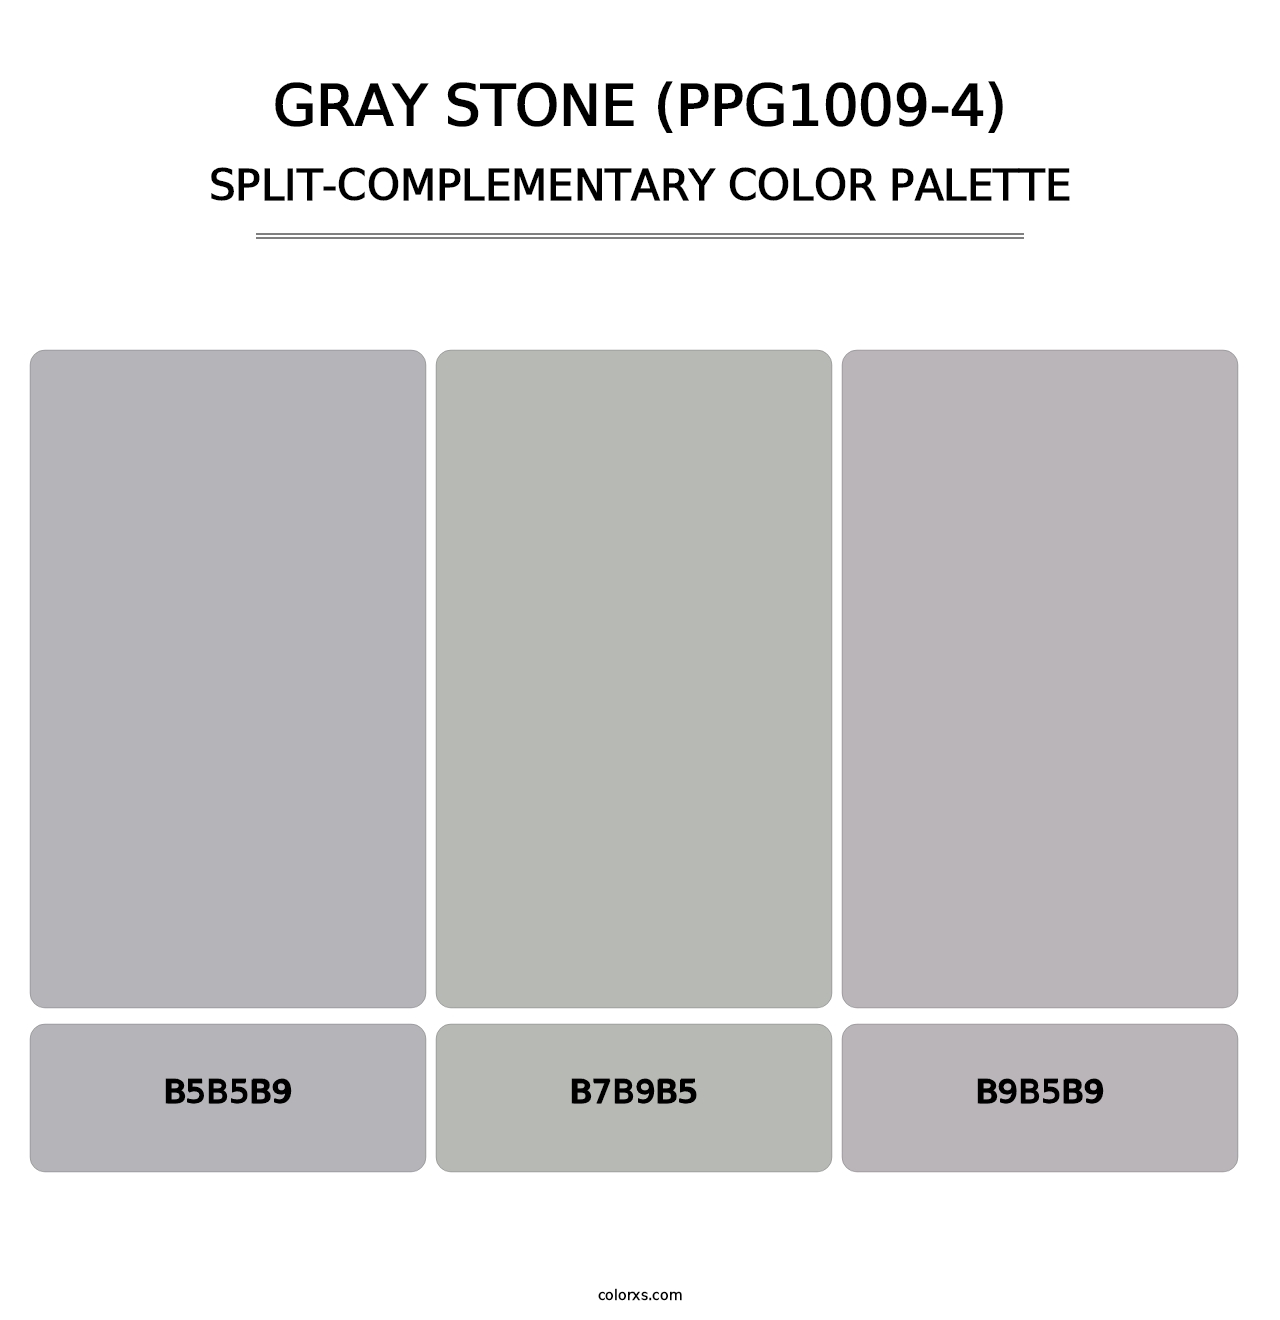 Gray Stone (PPG1009-4) - Split-Complementary Color Palette